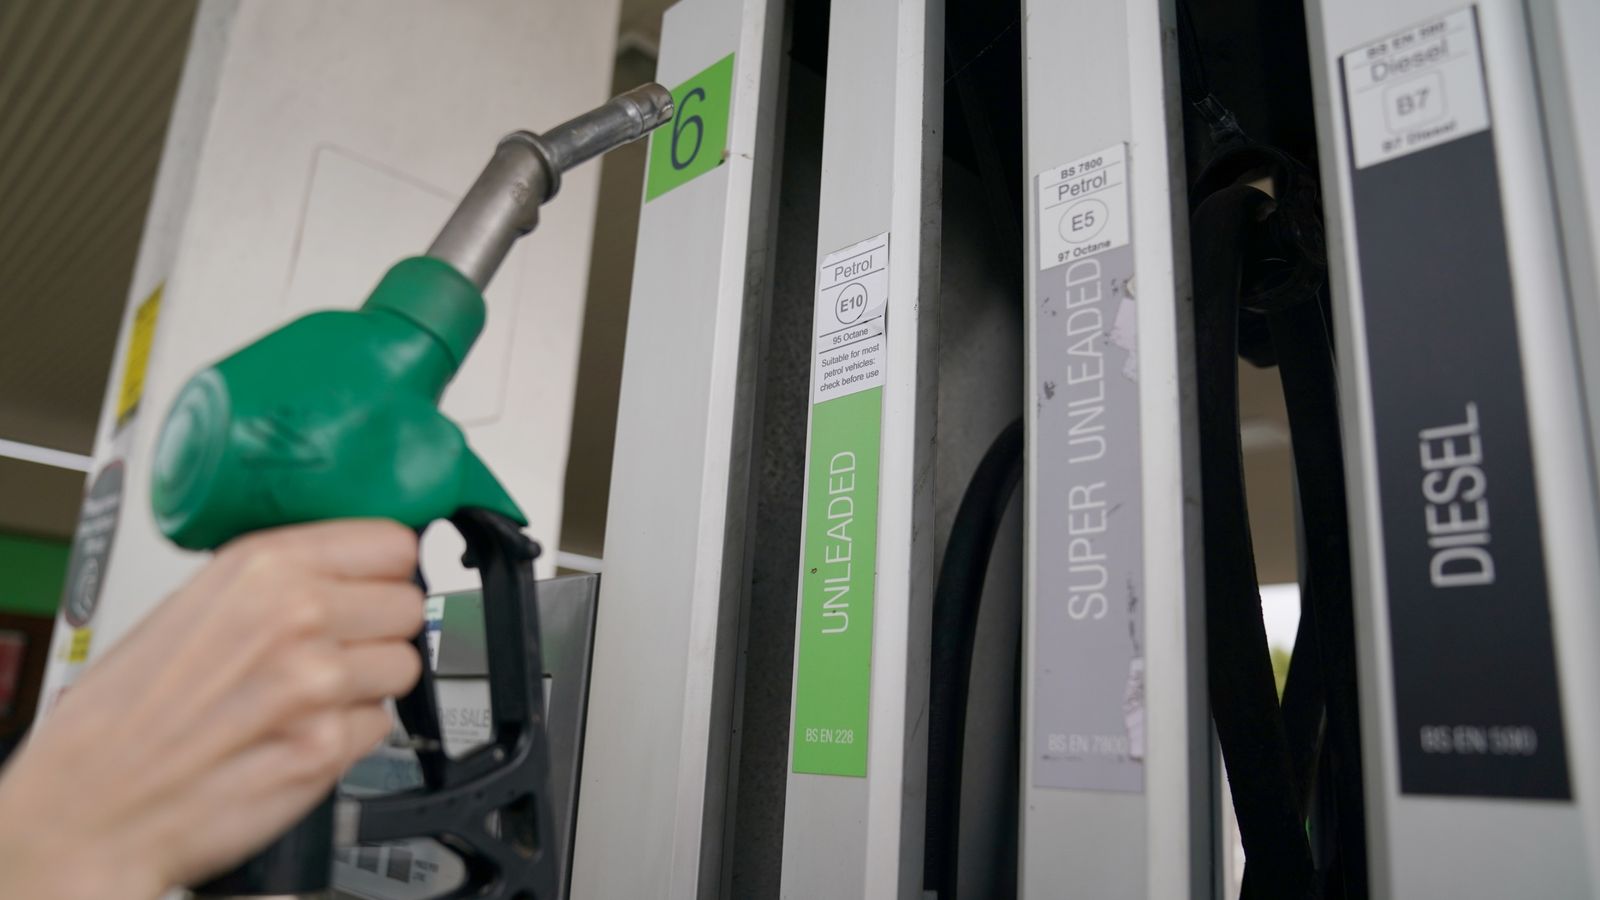 Chancellor urged to freeze fuel duty after OBR warns petrol could rise by 12p a litre